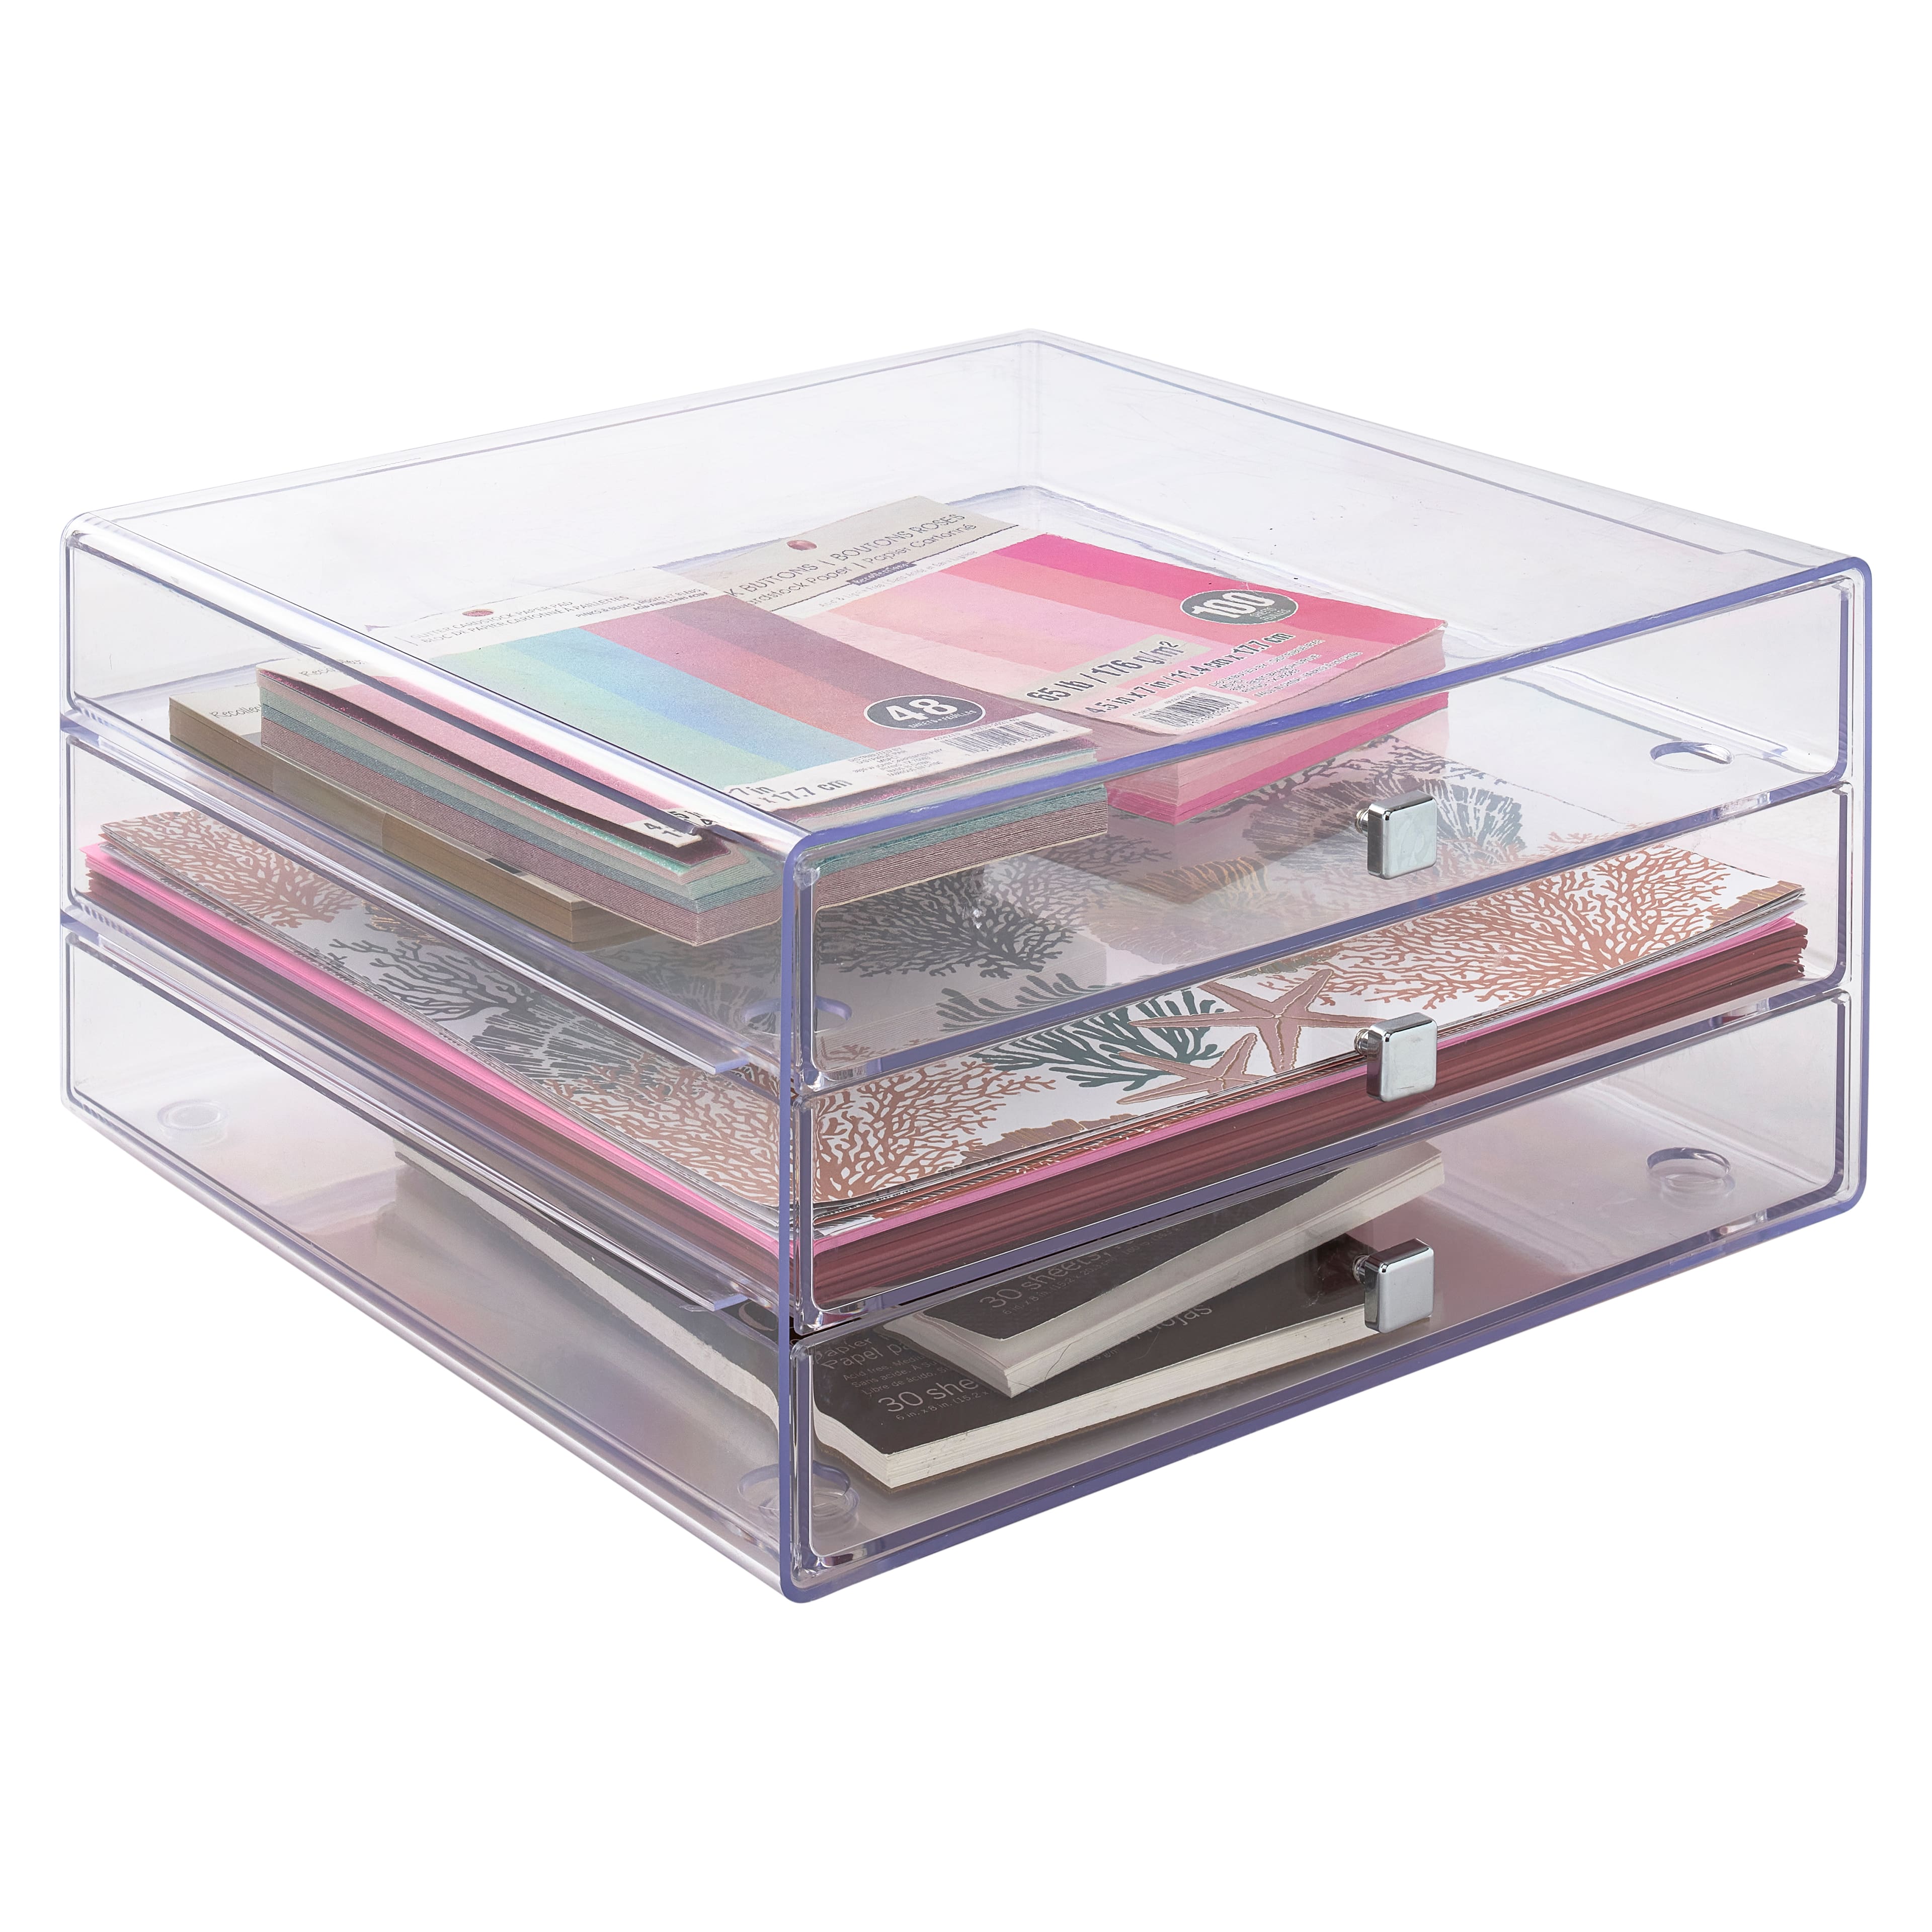 Buy in Bulk - 4 Pack: Clear 3-Drawer Organizer by Simply Tidy™